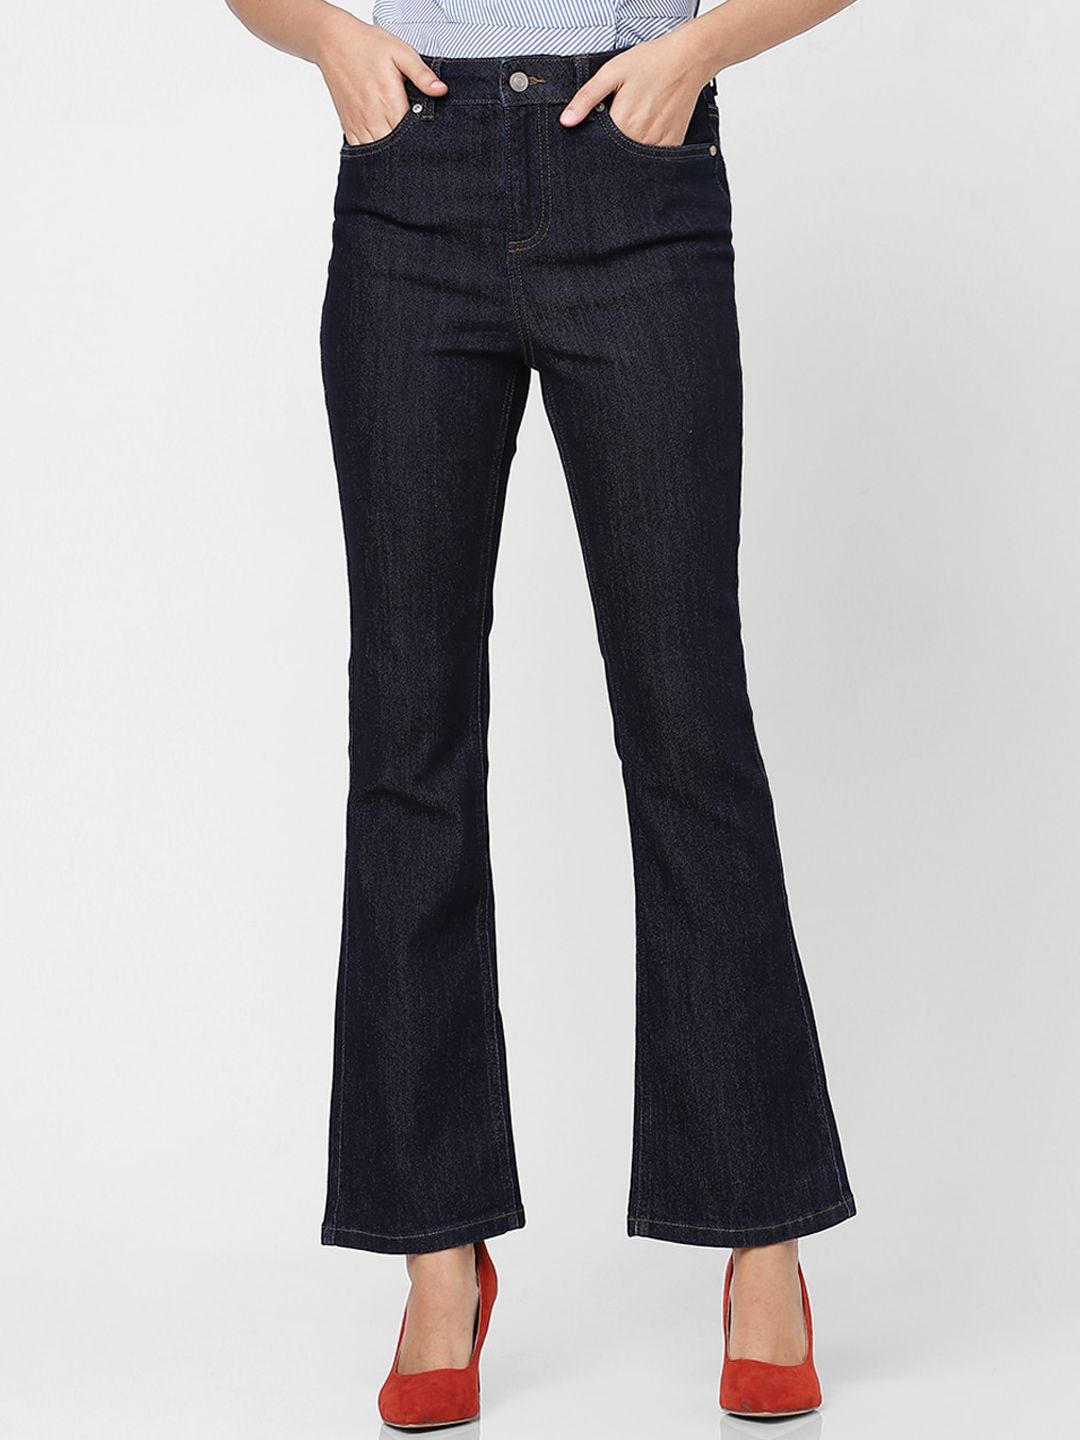 Vero Moda Women Navy Blue Bootcut High-Rise Stretchable Jeans Price in India